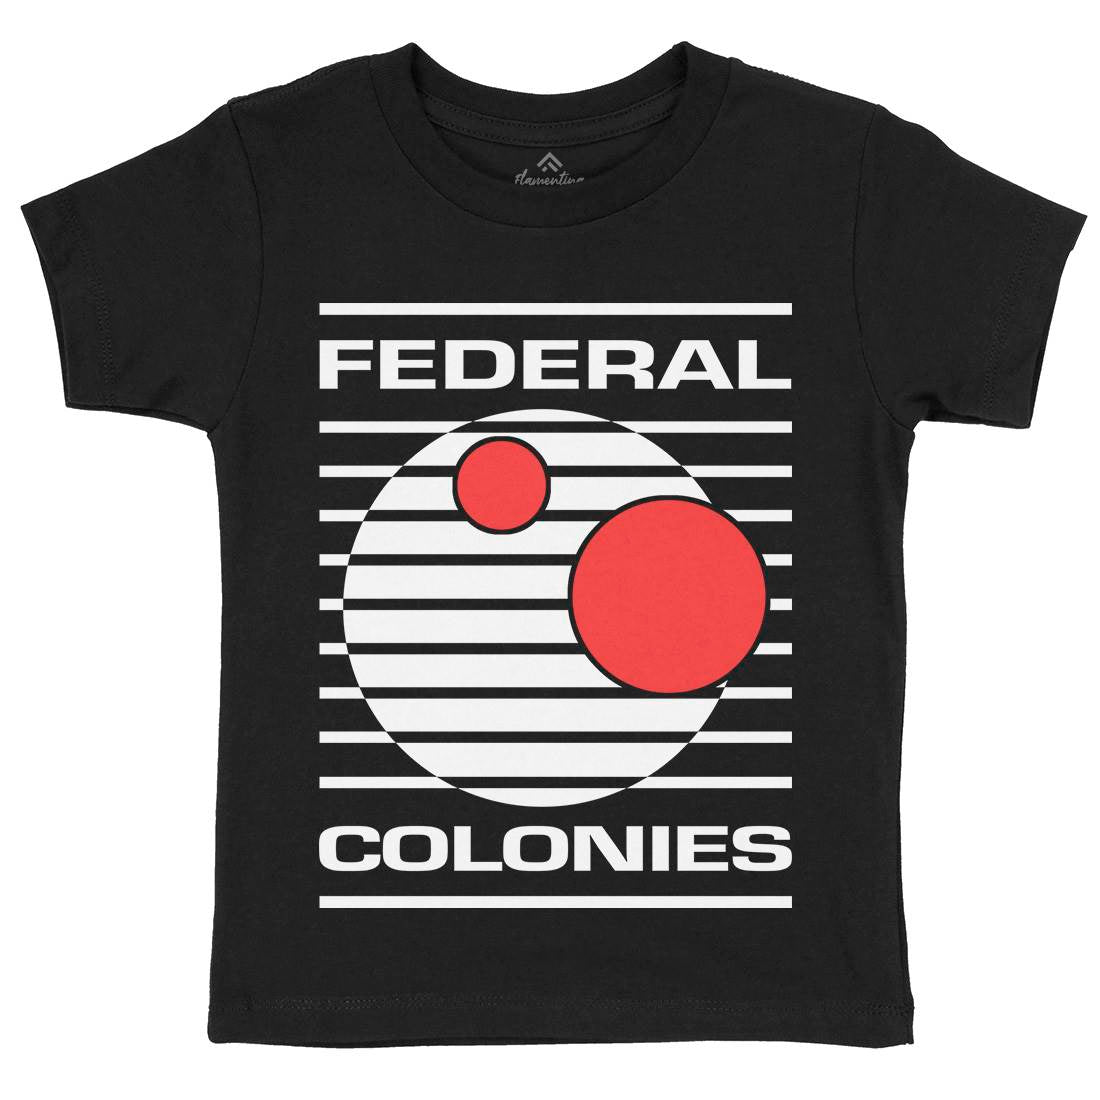 Federal Colonies Kids Organic Crew Neck T-Shirt Space D409